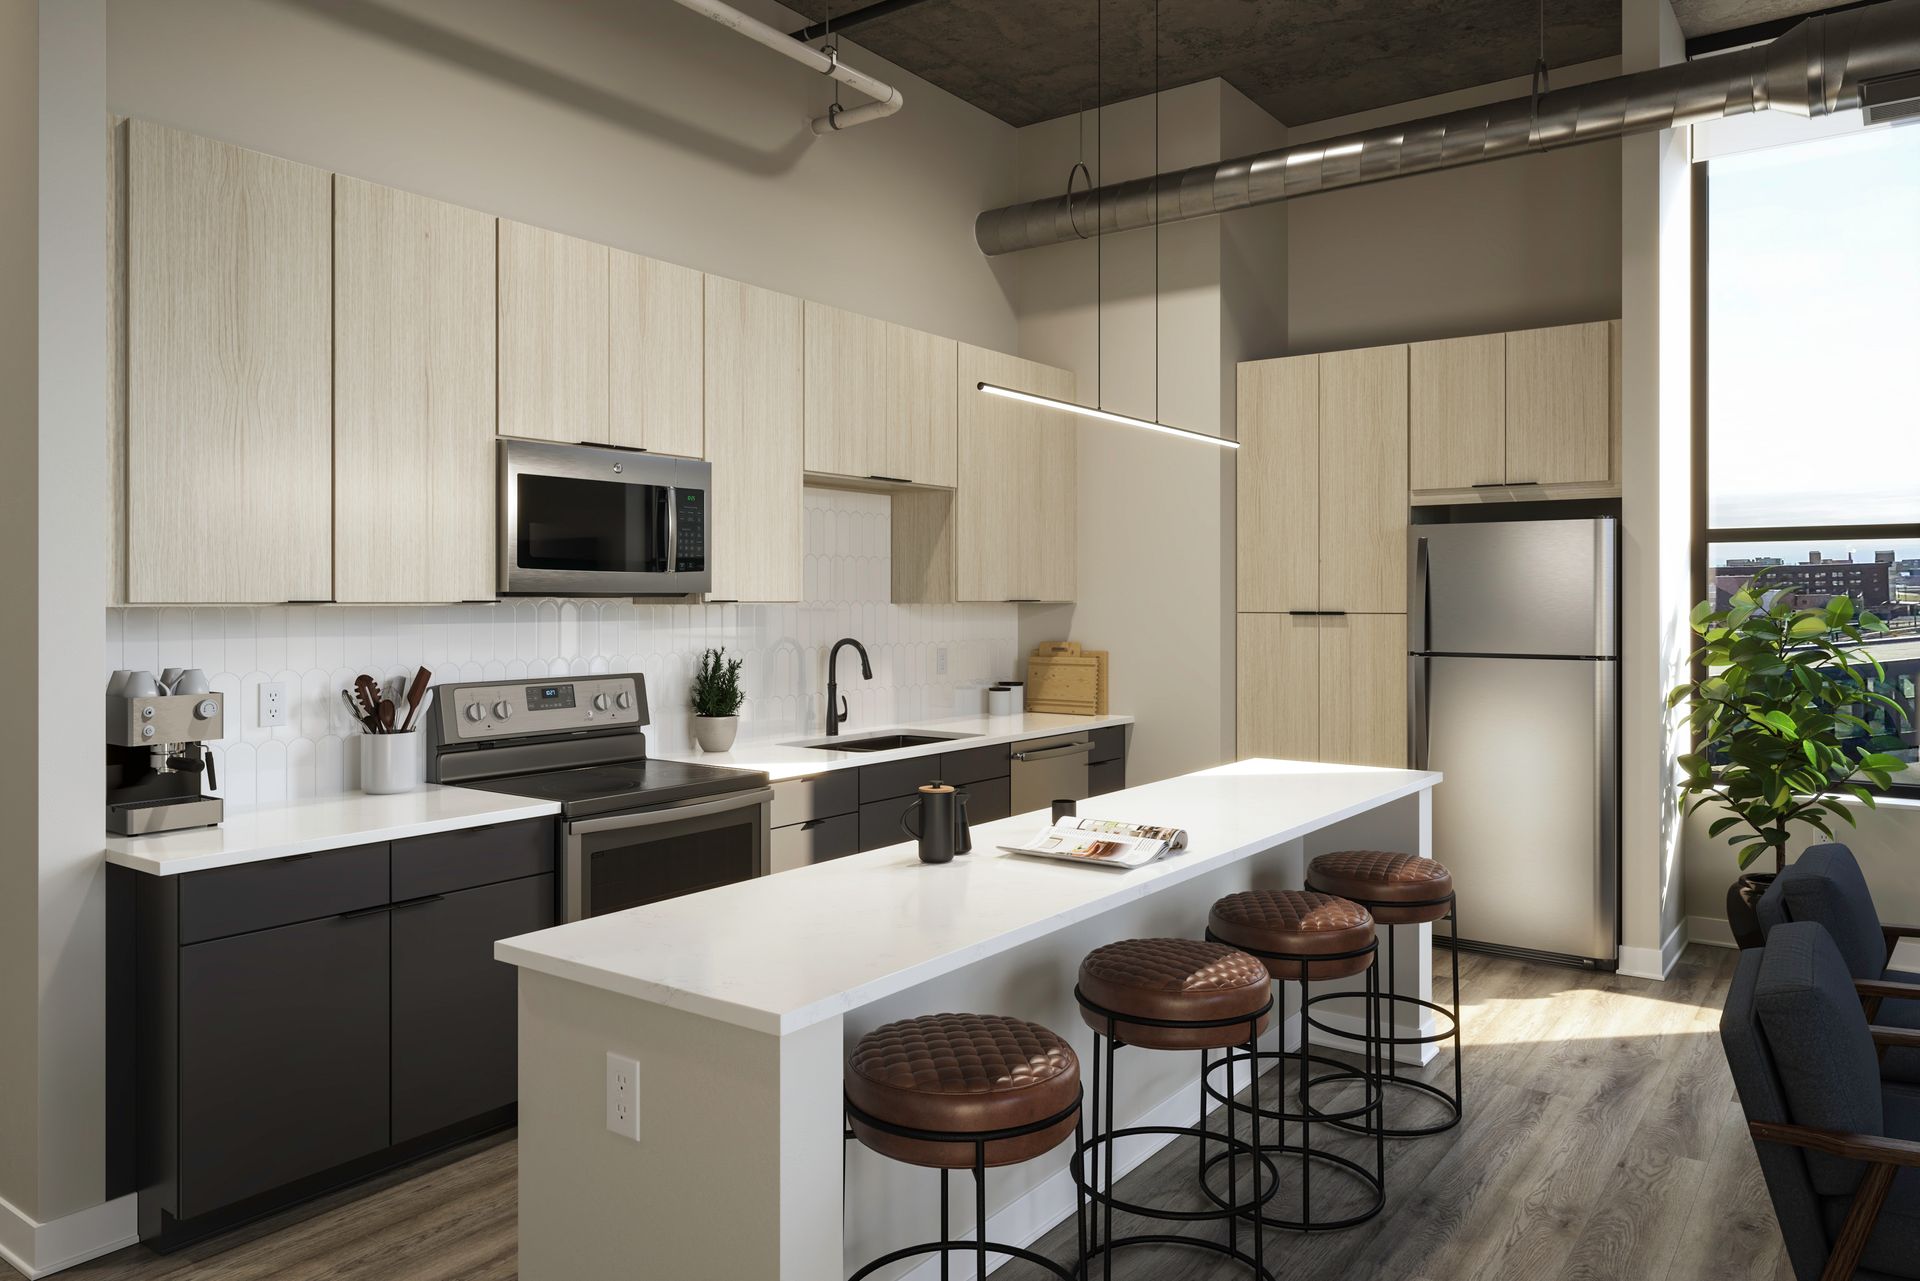 An artist 's impression of a kitchen with a long island and stools at 4th & Park